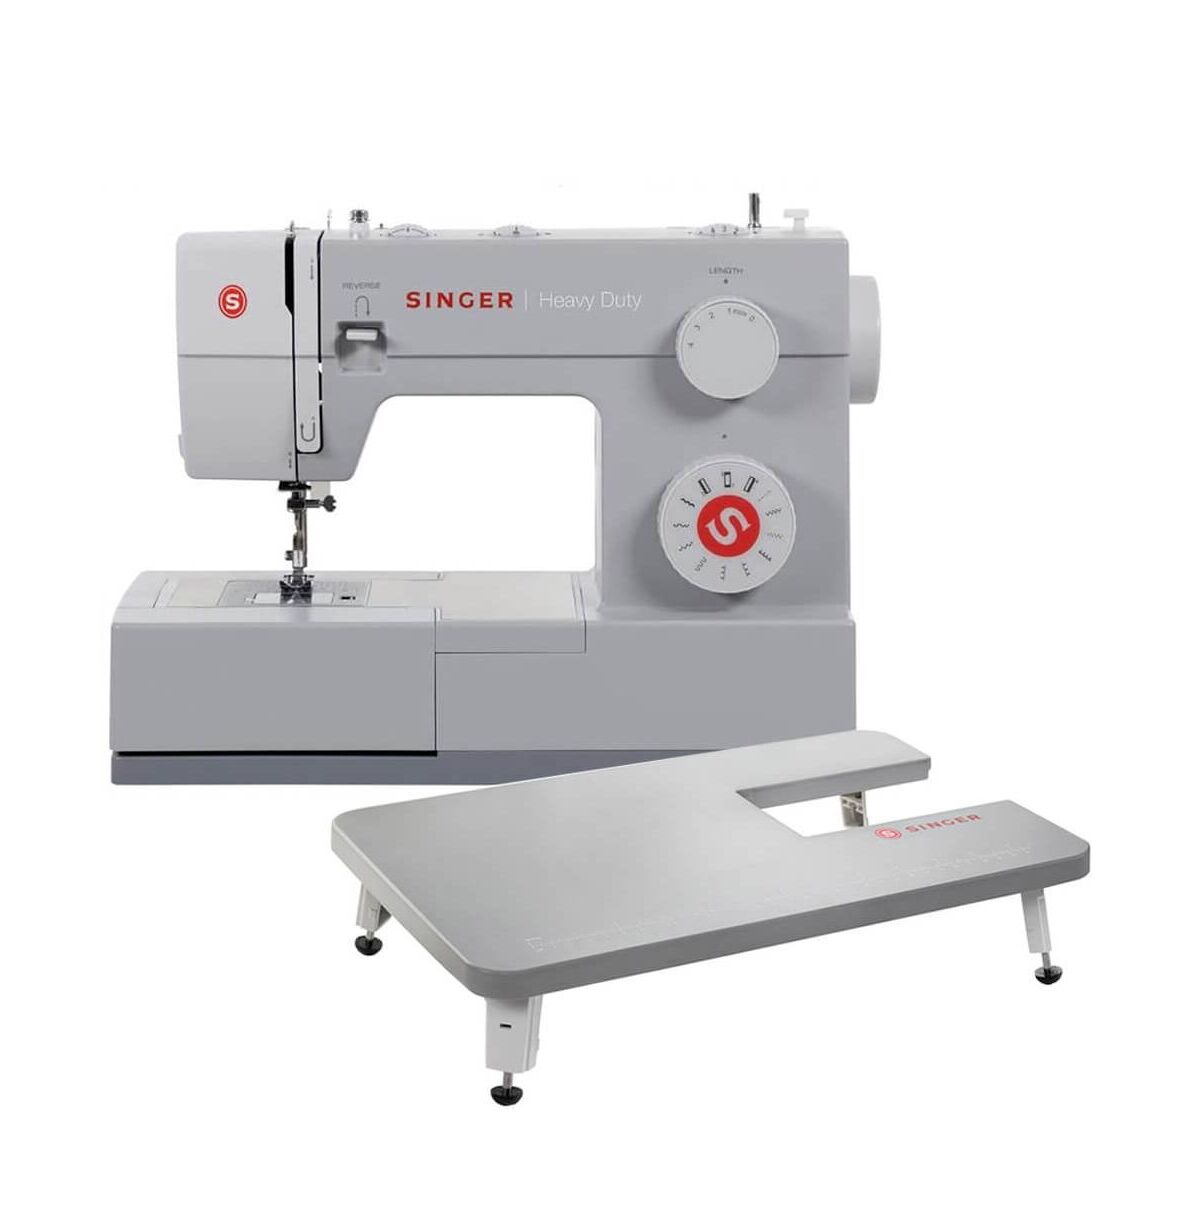 Singer Heavy Duty 4411 Sewing Machine with Extension Table - Grey